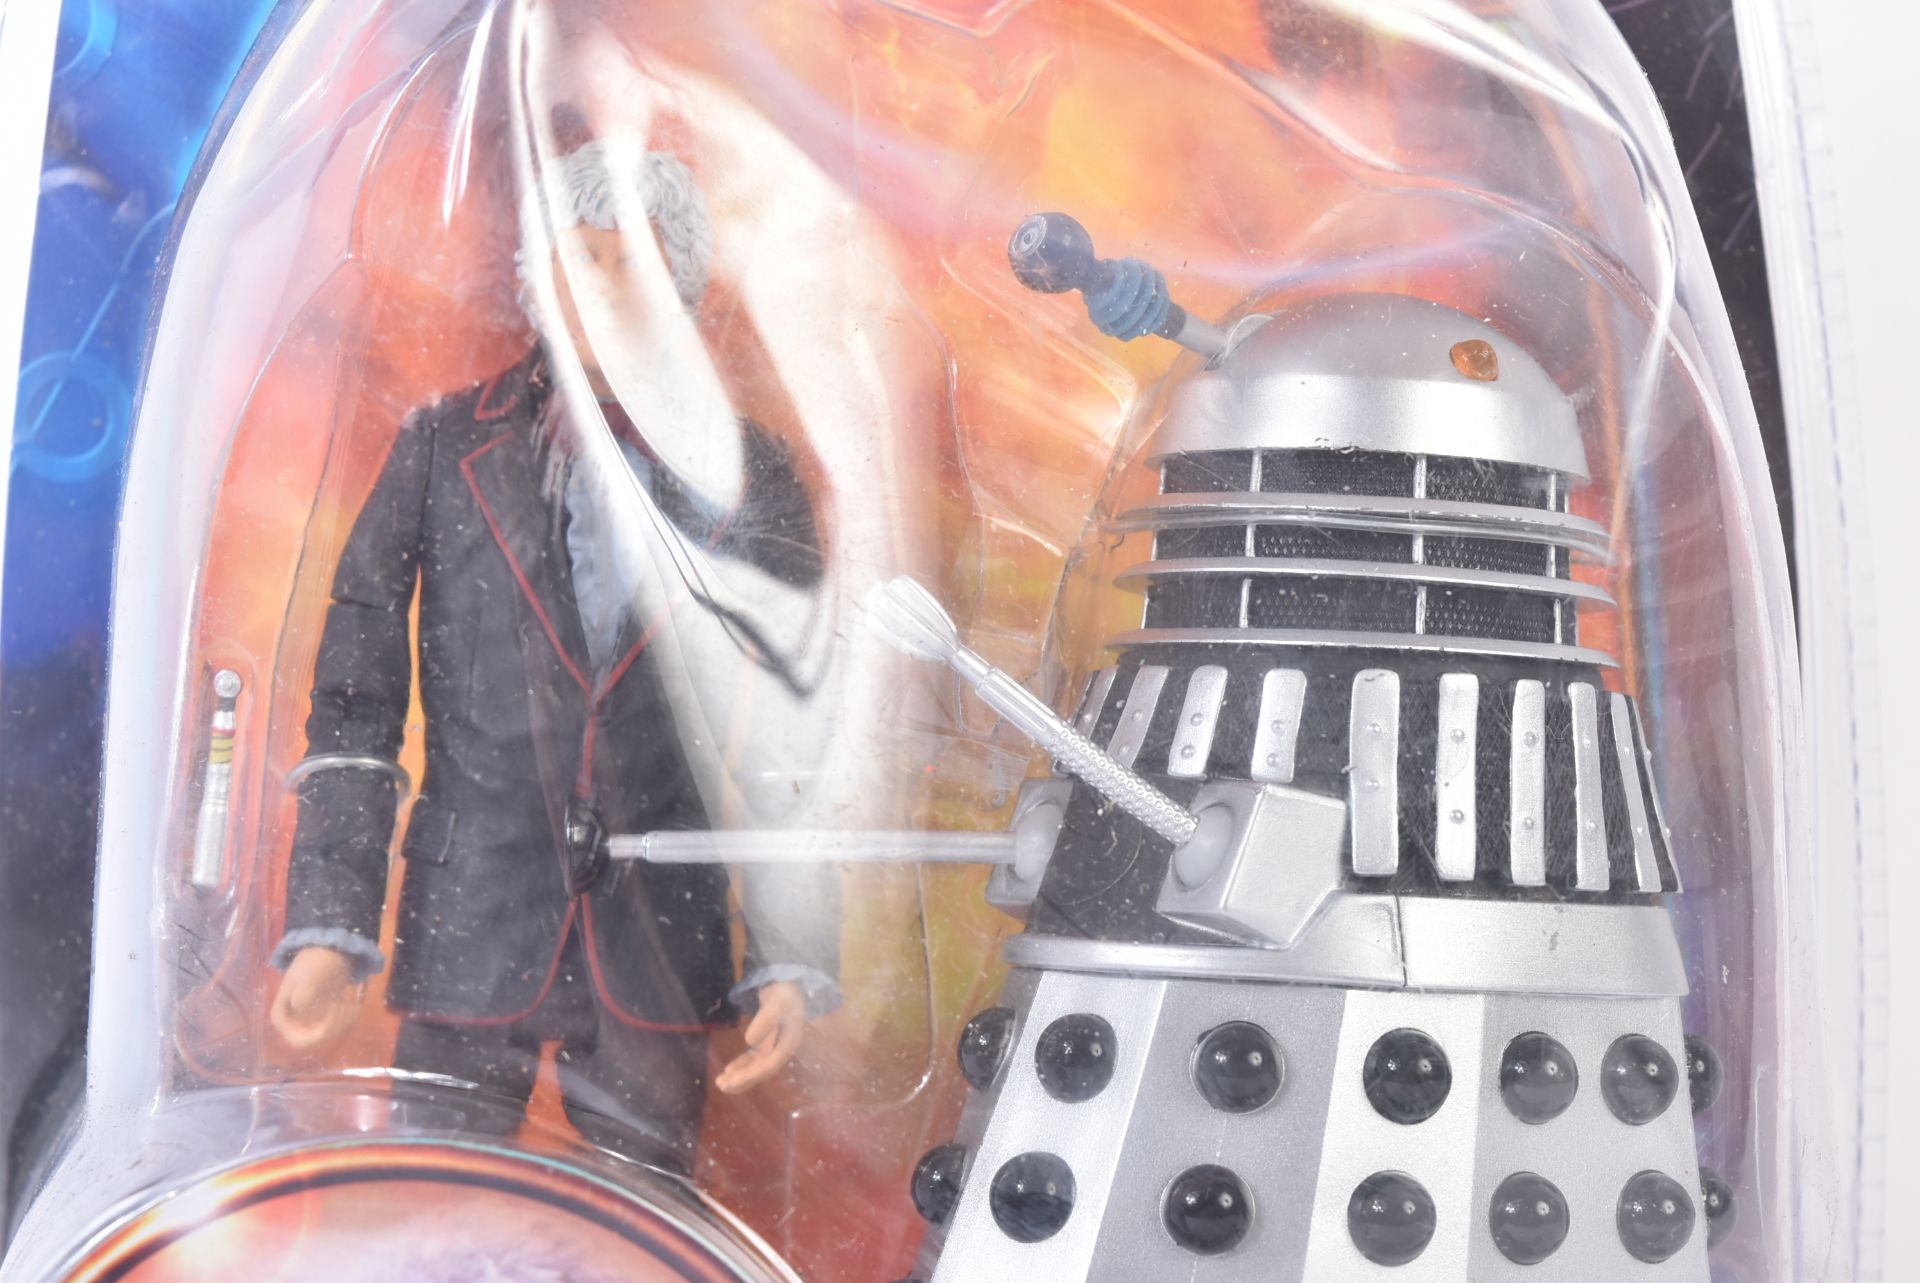 DOCTOR WHO - CHARACTER OPTIONS - THIRD DOCTOR ACTION FIGURE SET - Image 2 of 4